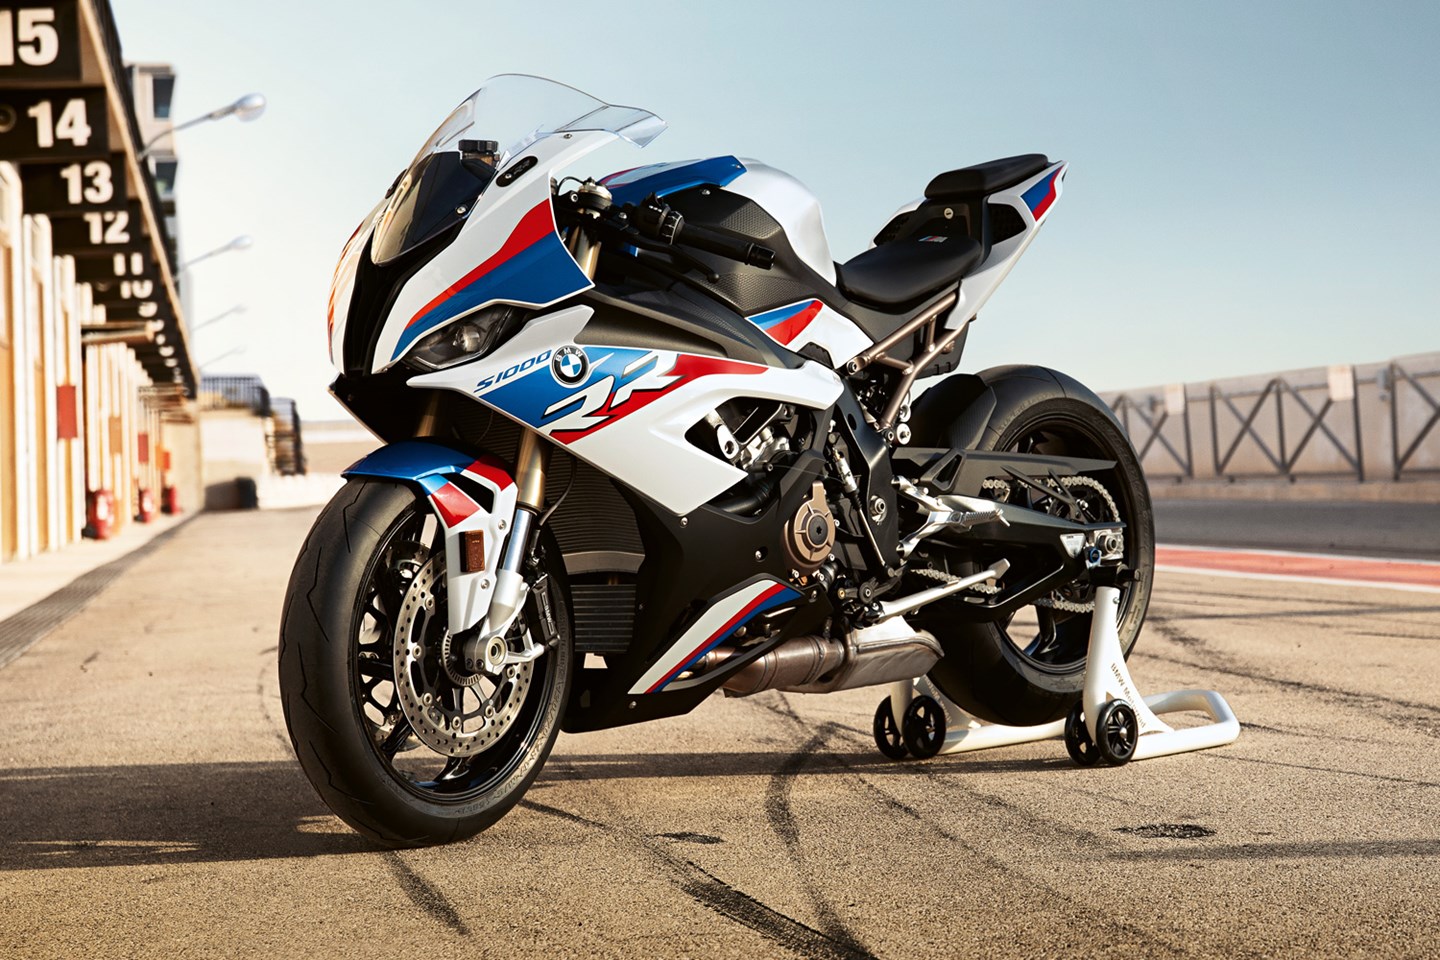 A BMW S1000RR motorcycle in the pits at a racetrack at dusk